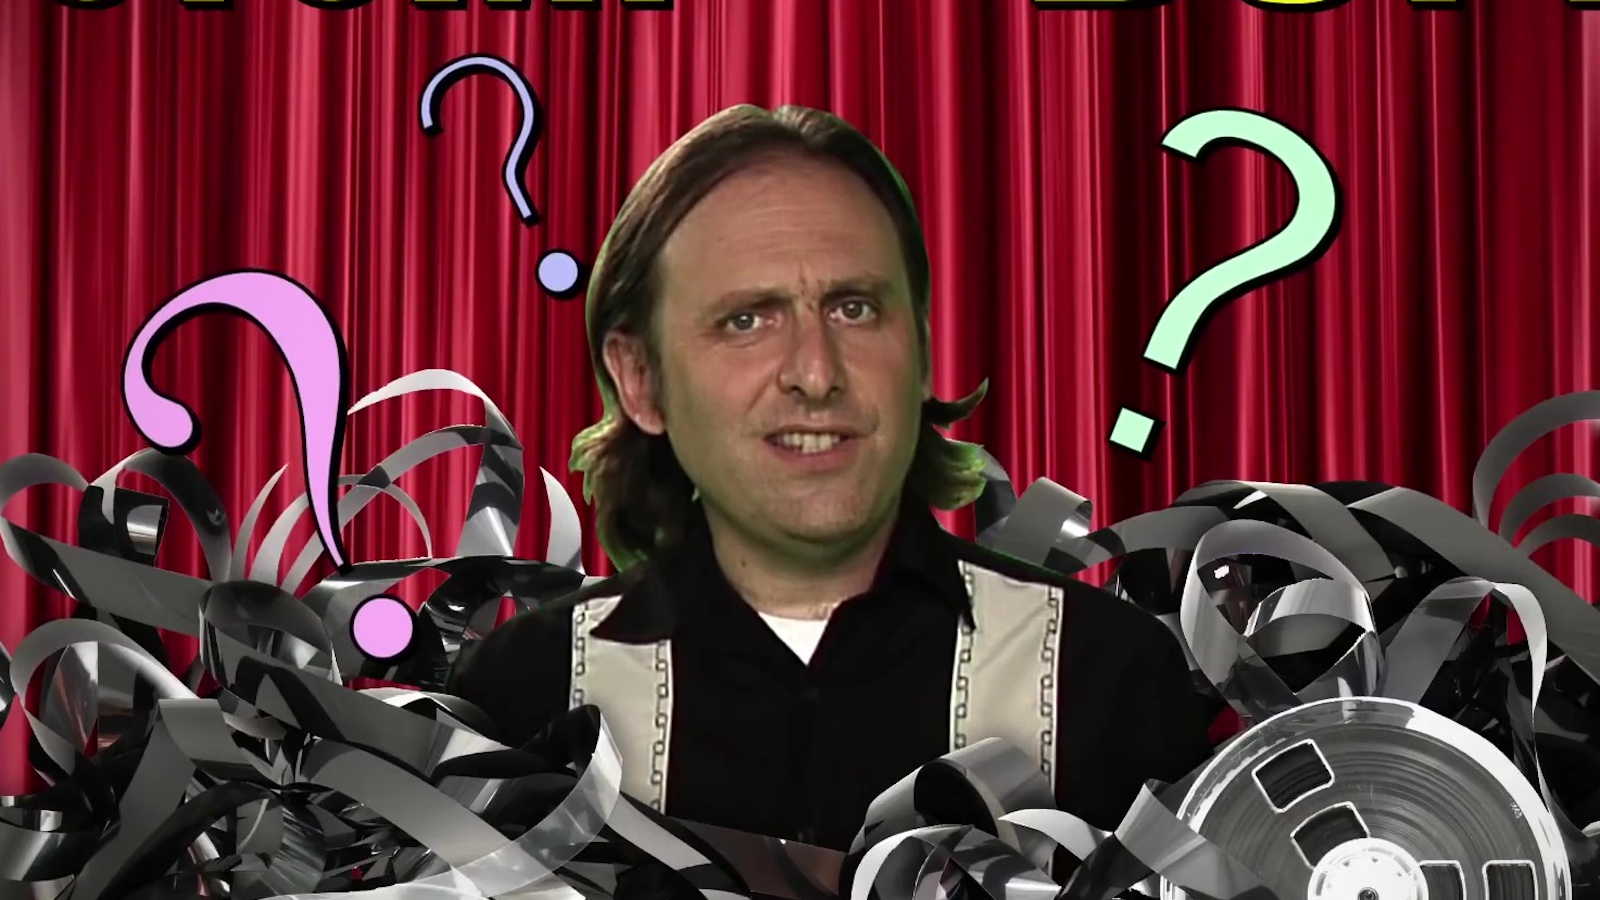 A goofy man looking into camera and surrounded by question marks and film reel cans